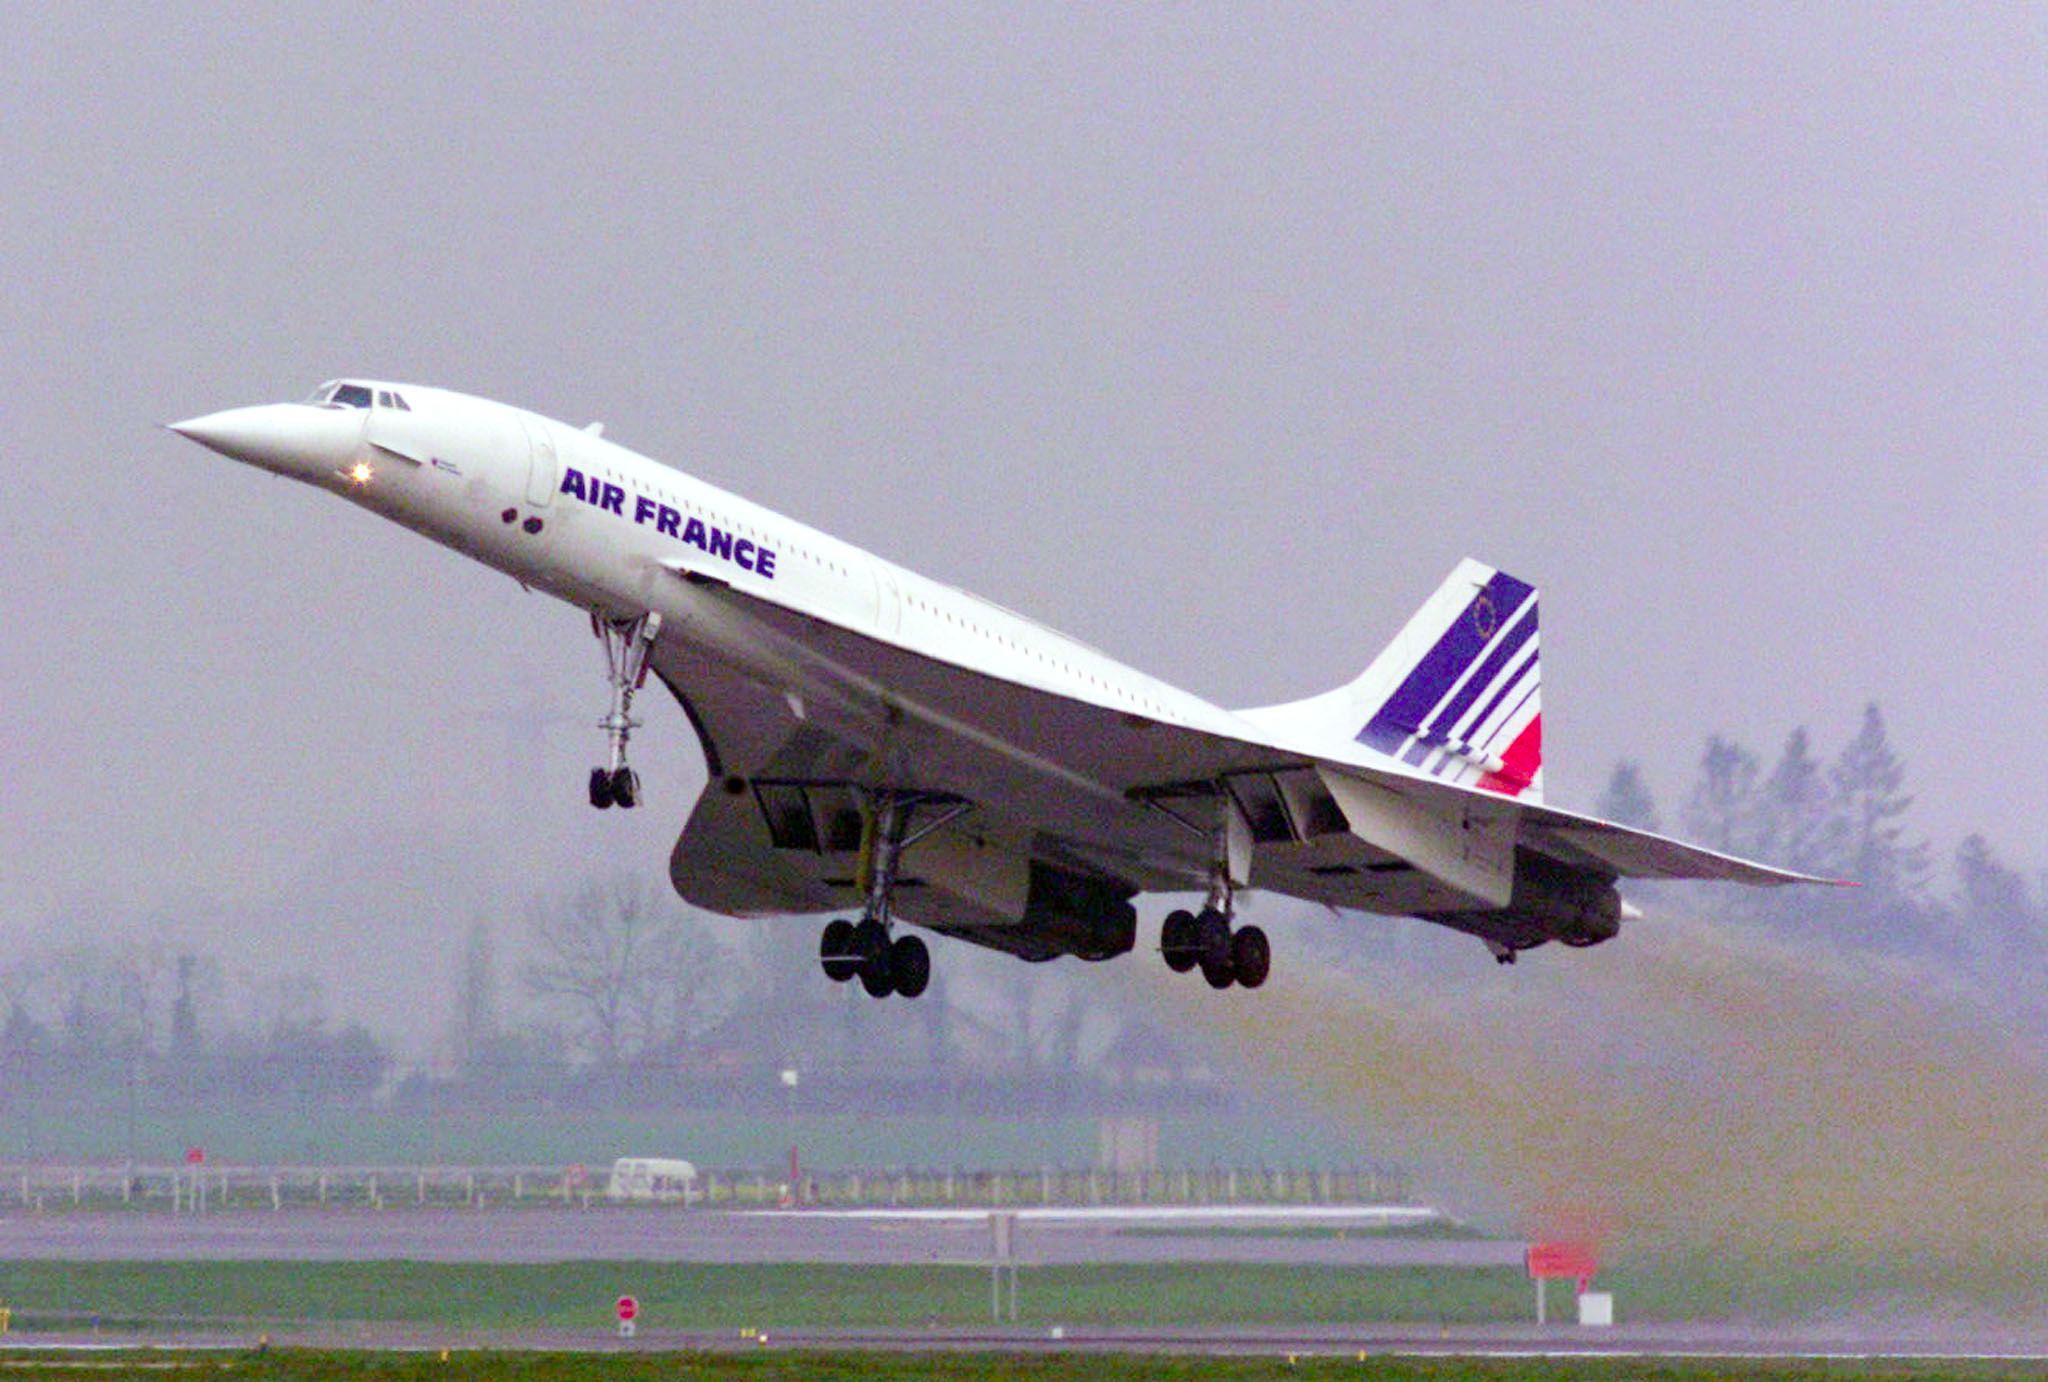 Concorde air france taking off